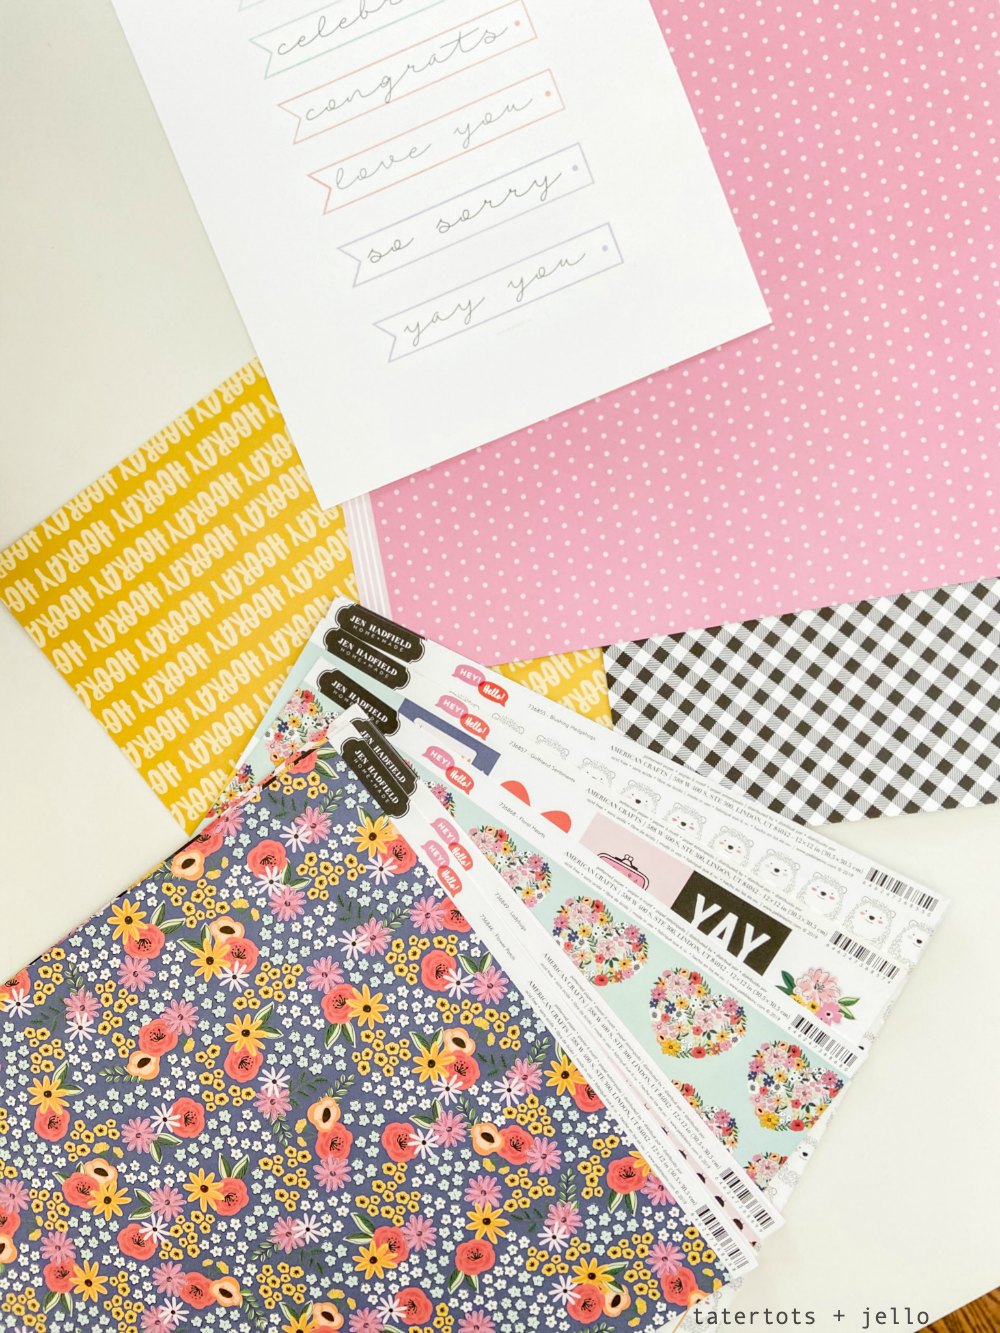 Simple All-Occasion Printable Gift Tags. Use scrapbook paper to wrap gift and add these simple printable tags for ALL occasions! They make gift-giving so easy! 